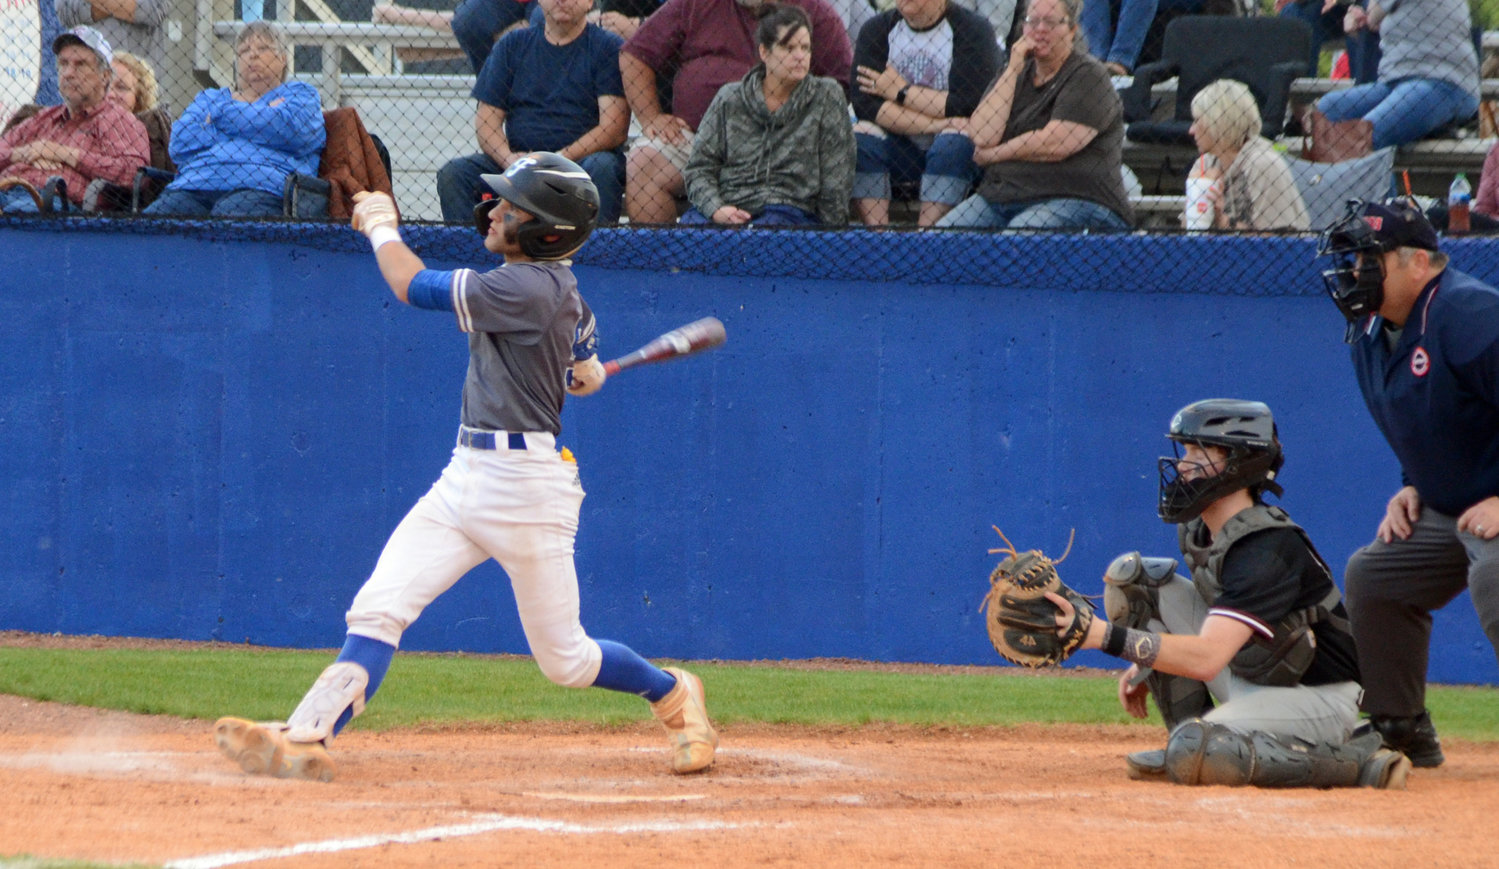 Camden Vaughn, who went 2-for-3 with an RBI and two runs scored, nails a leadoff triple in the bottom of the fifth inning before coming around to score the tying run.